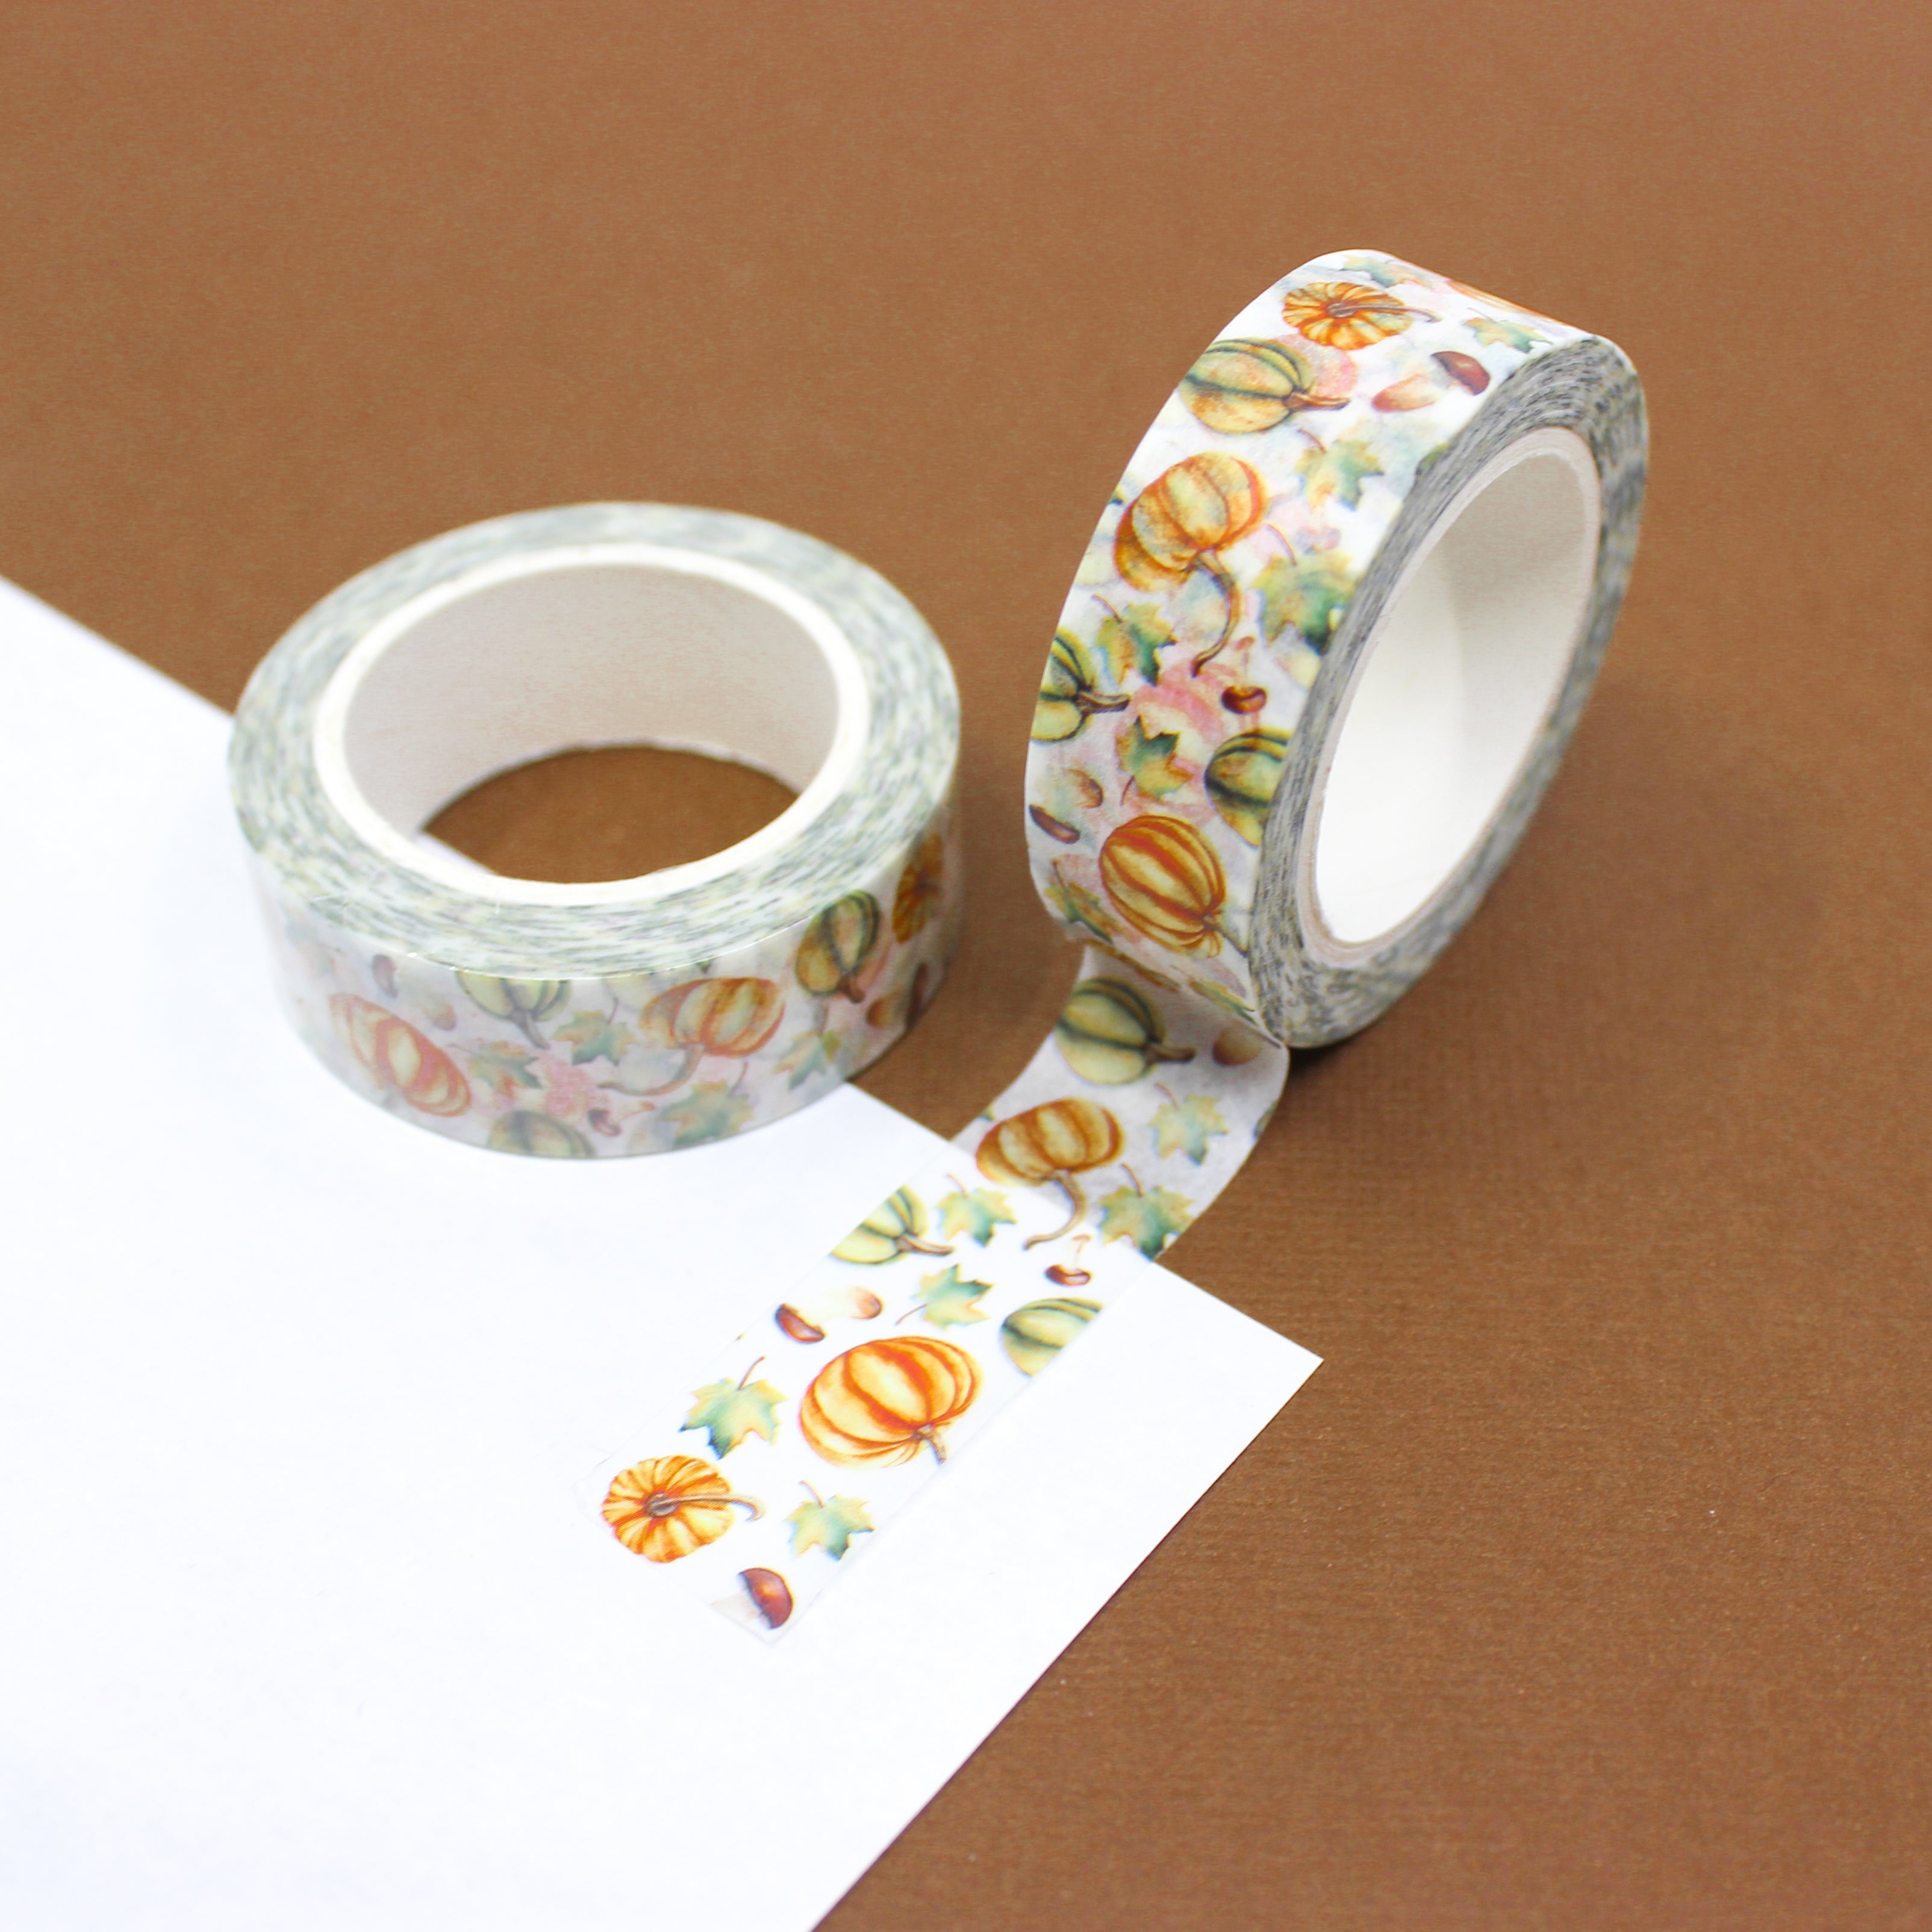 This is a cute orange pumpkin and ghords pattern washi tape from BBB Supplies Craft Shop